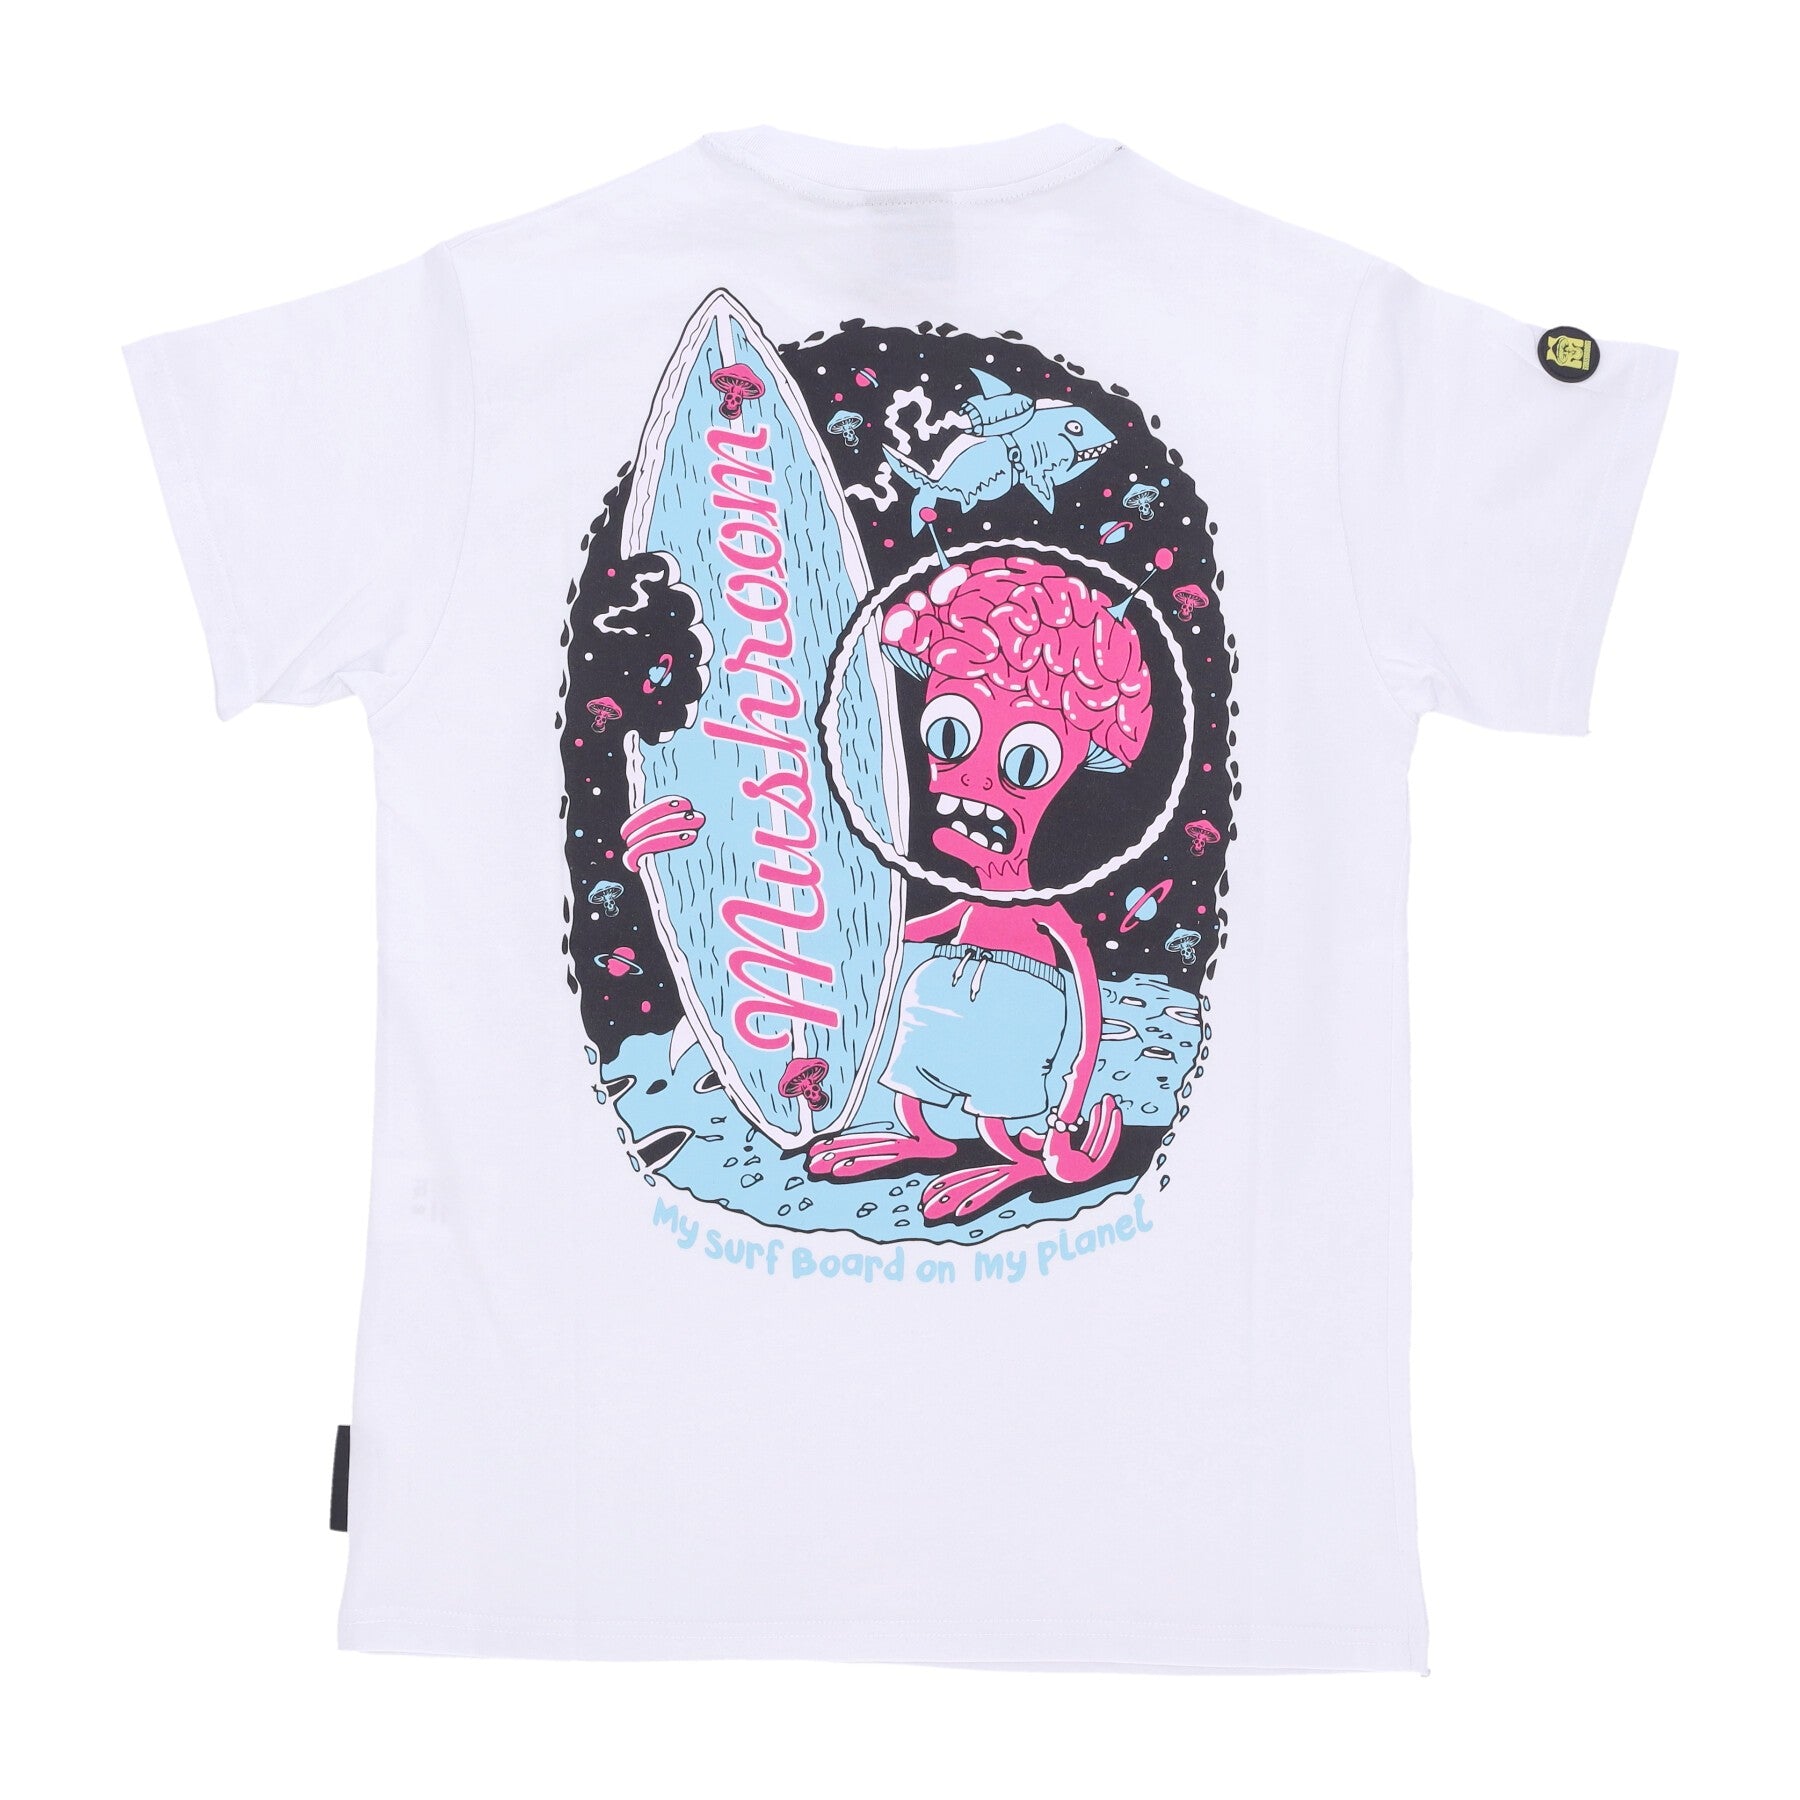 Men's Surfboard On My Planet Tee White T-Shirt